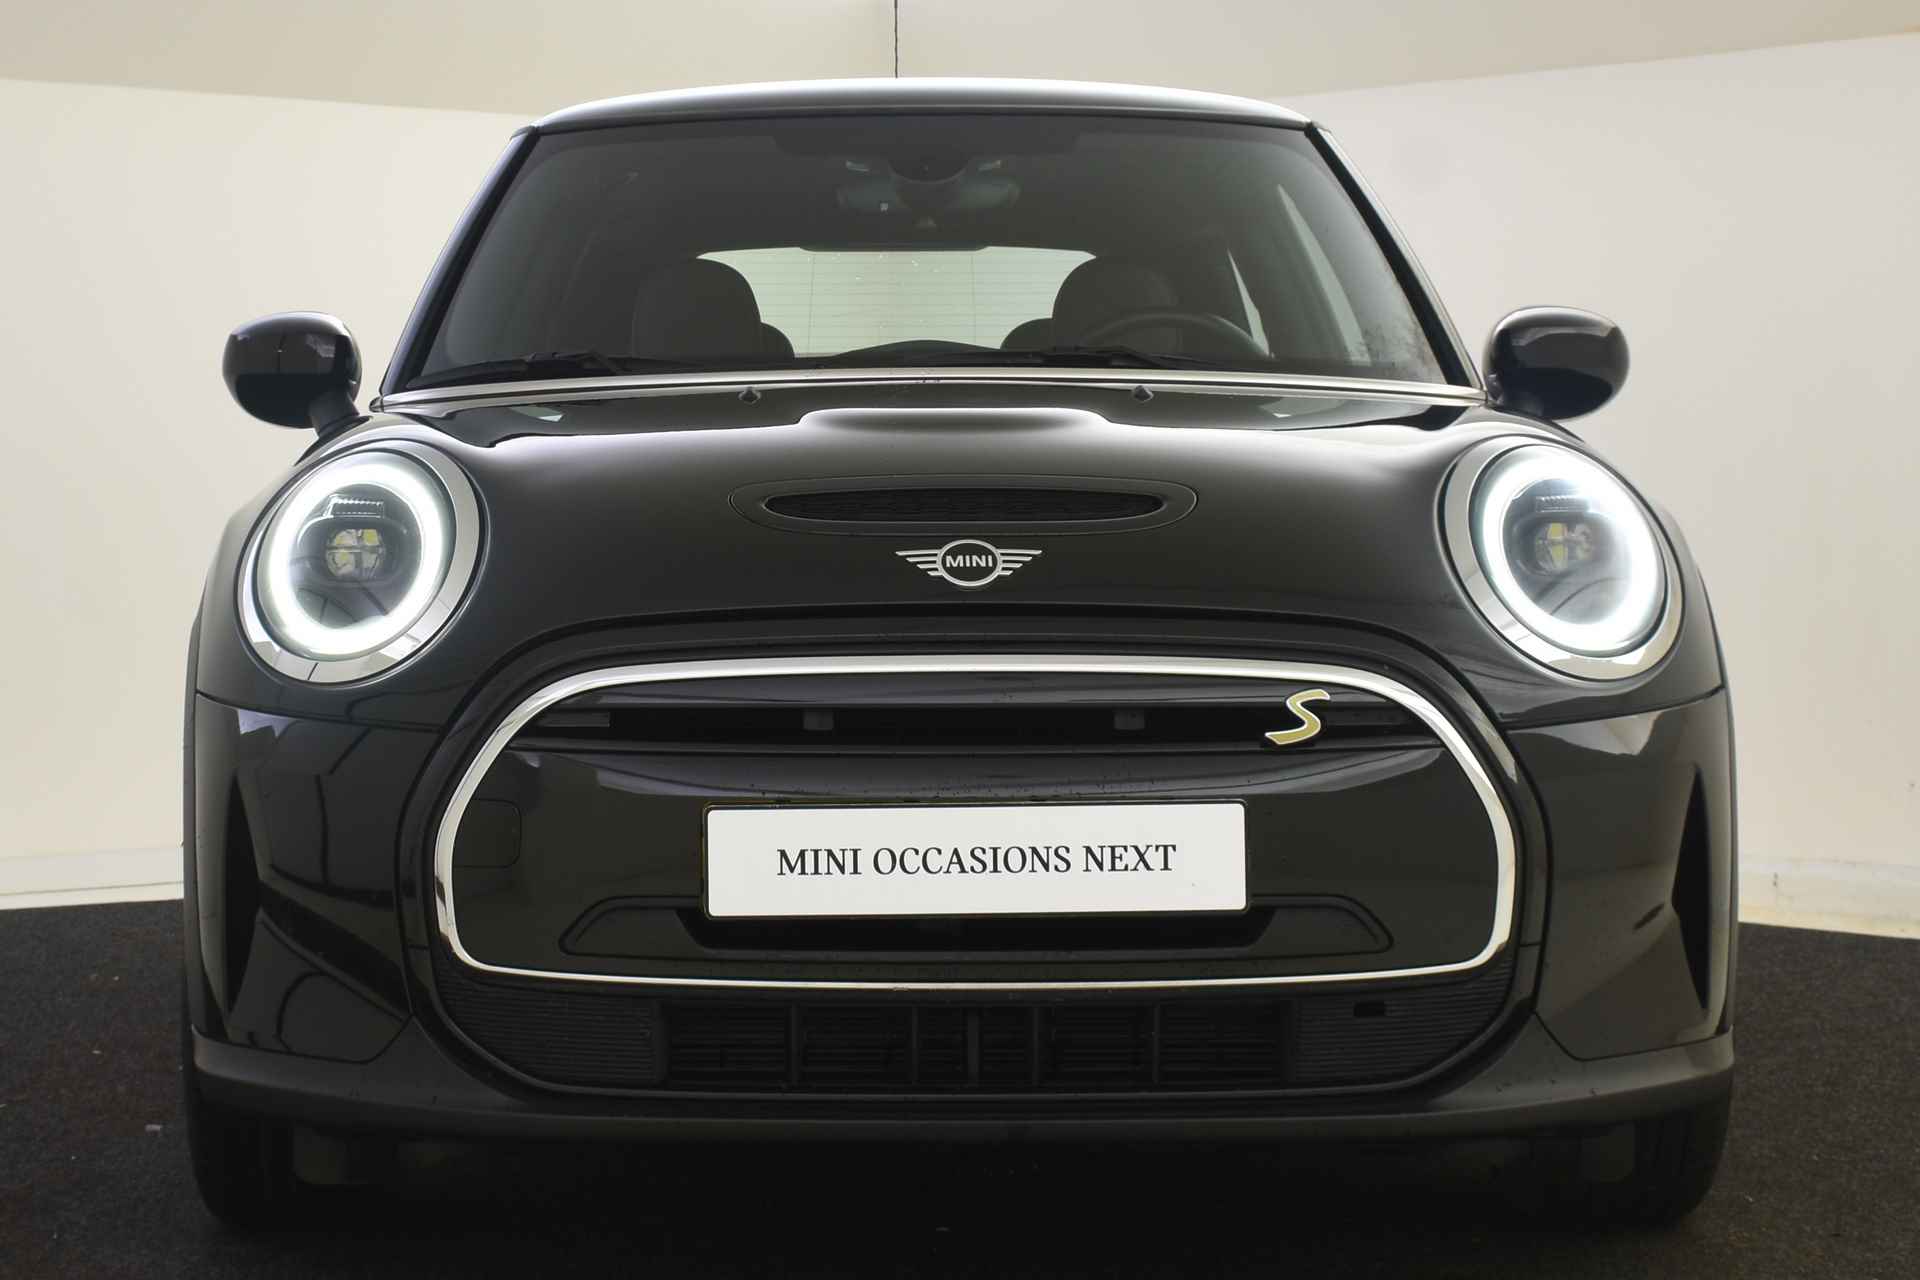 MINI Electric Classic 33 kWh / Sportstoelen / LED / Head-Up / Cruise Control / PDC achter / Navigatie - 22/45